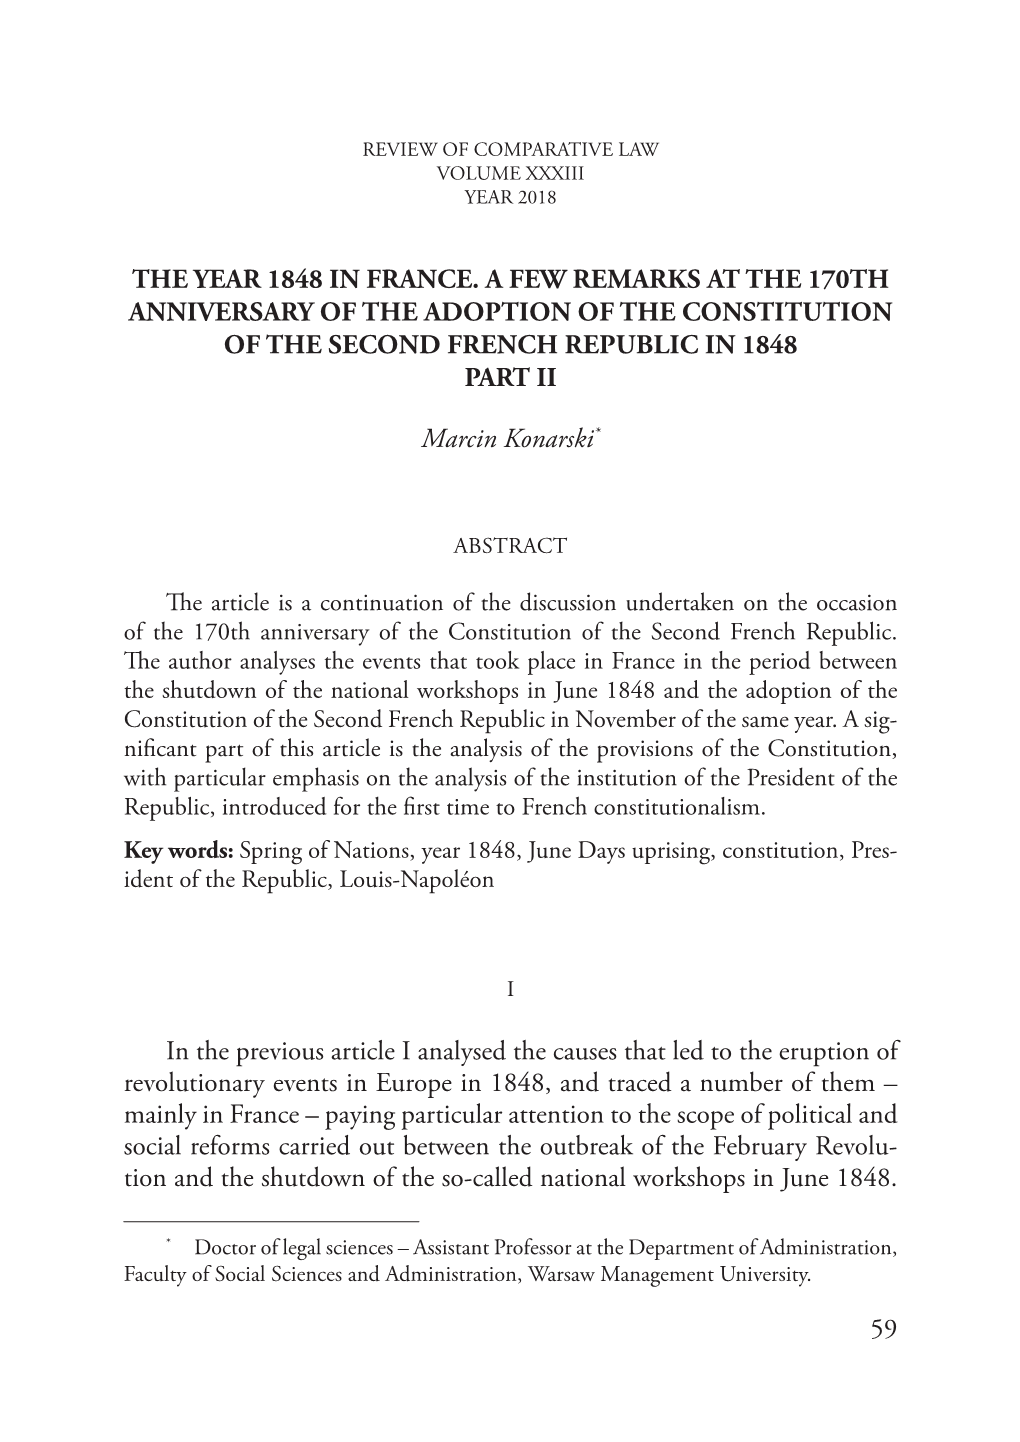 The Year 1848 in France. a Few Remarks at the 170Th Anniversary of the Adoption of the Constitution of the Second French Republic in 1848 Part Ii